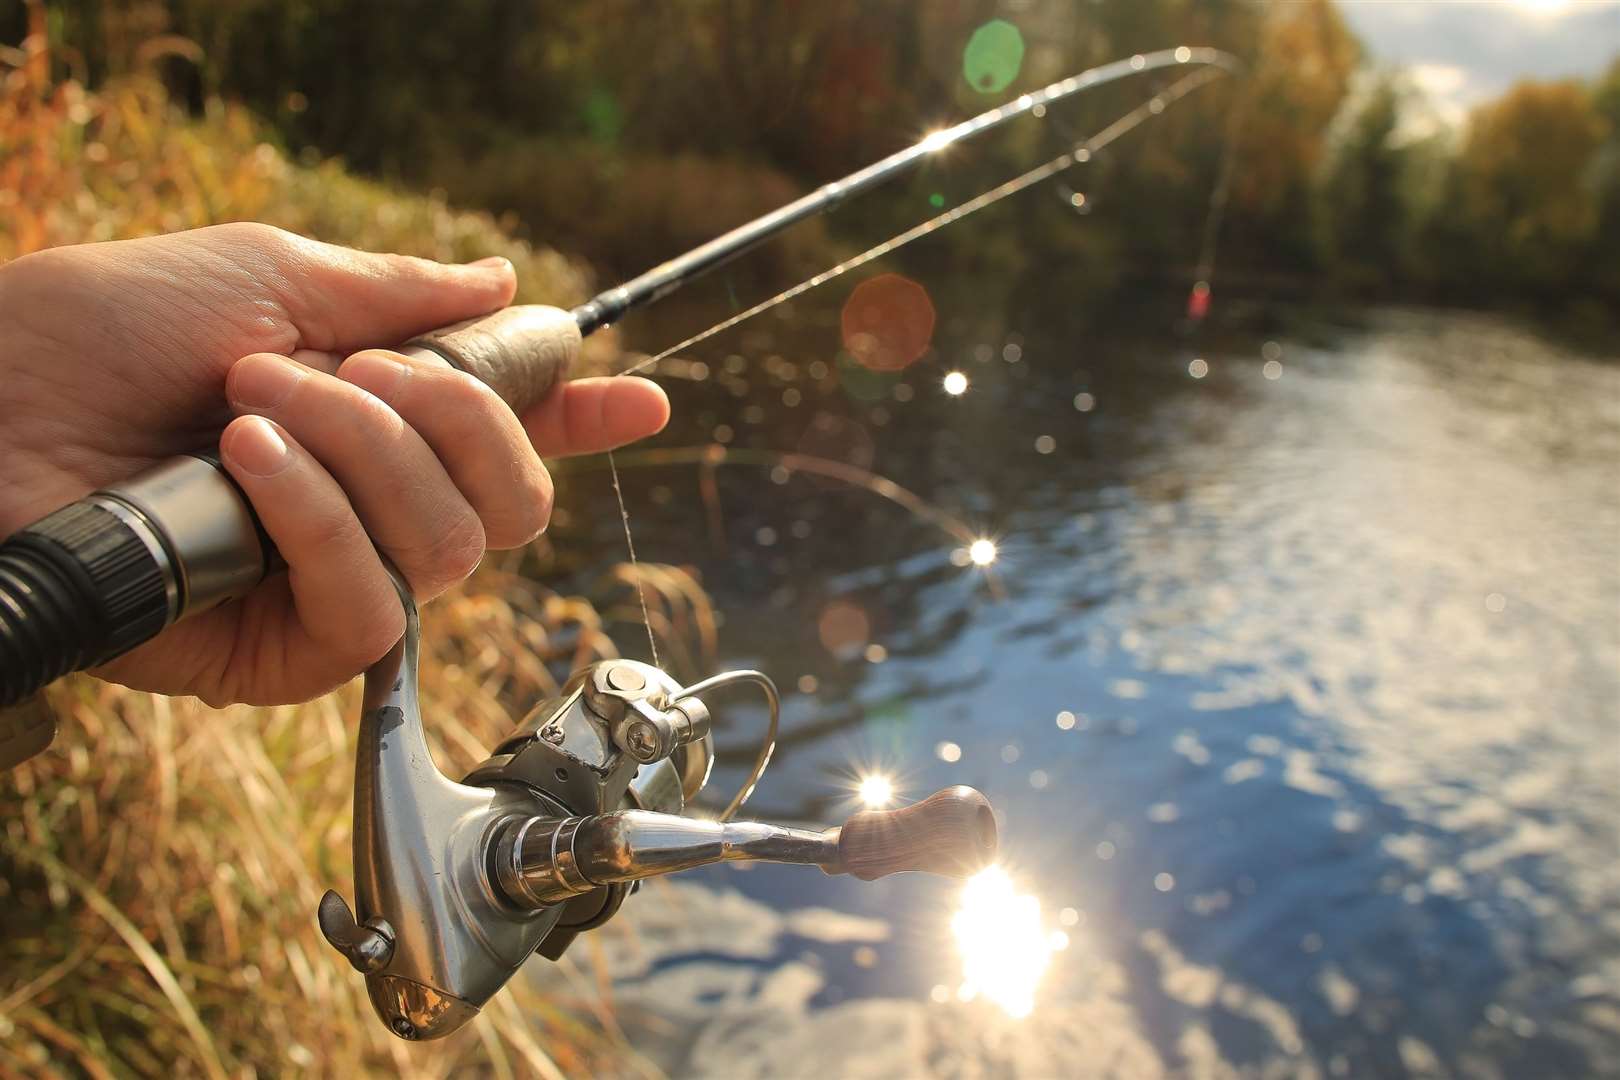 Fishing activities can take place across the country including angling competitions and sea fishing.